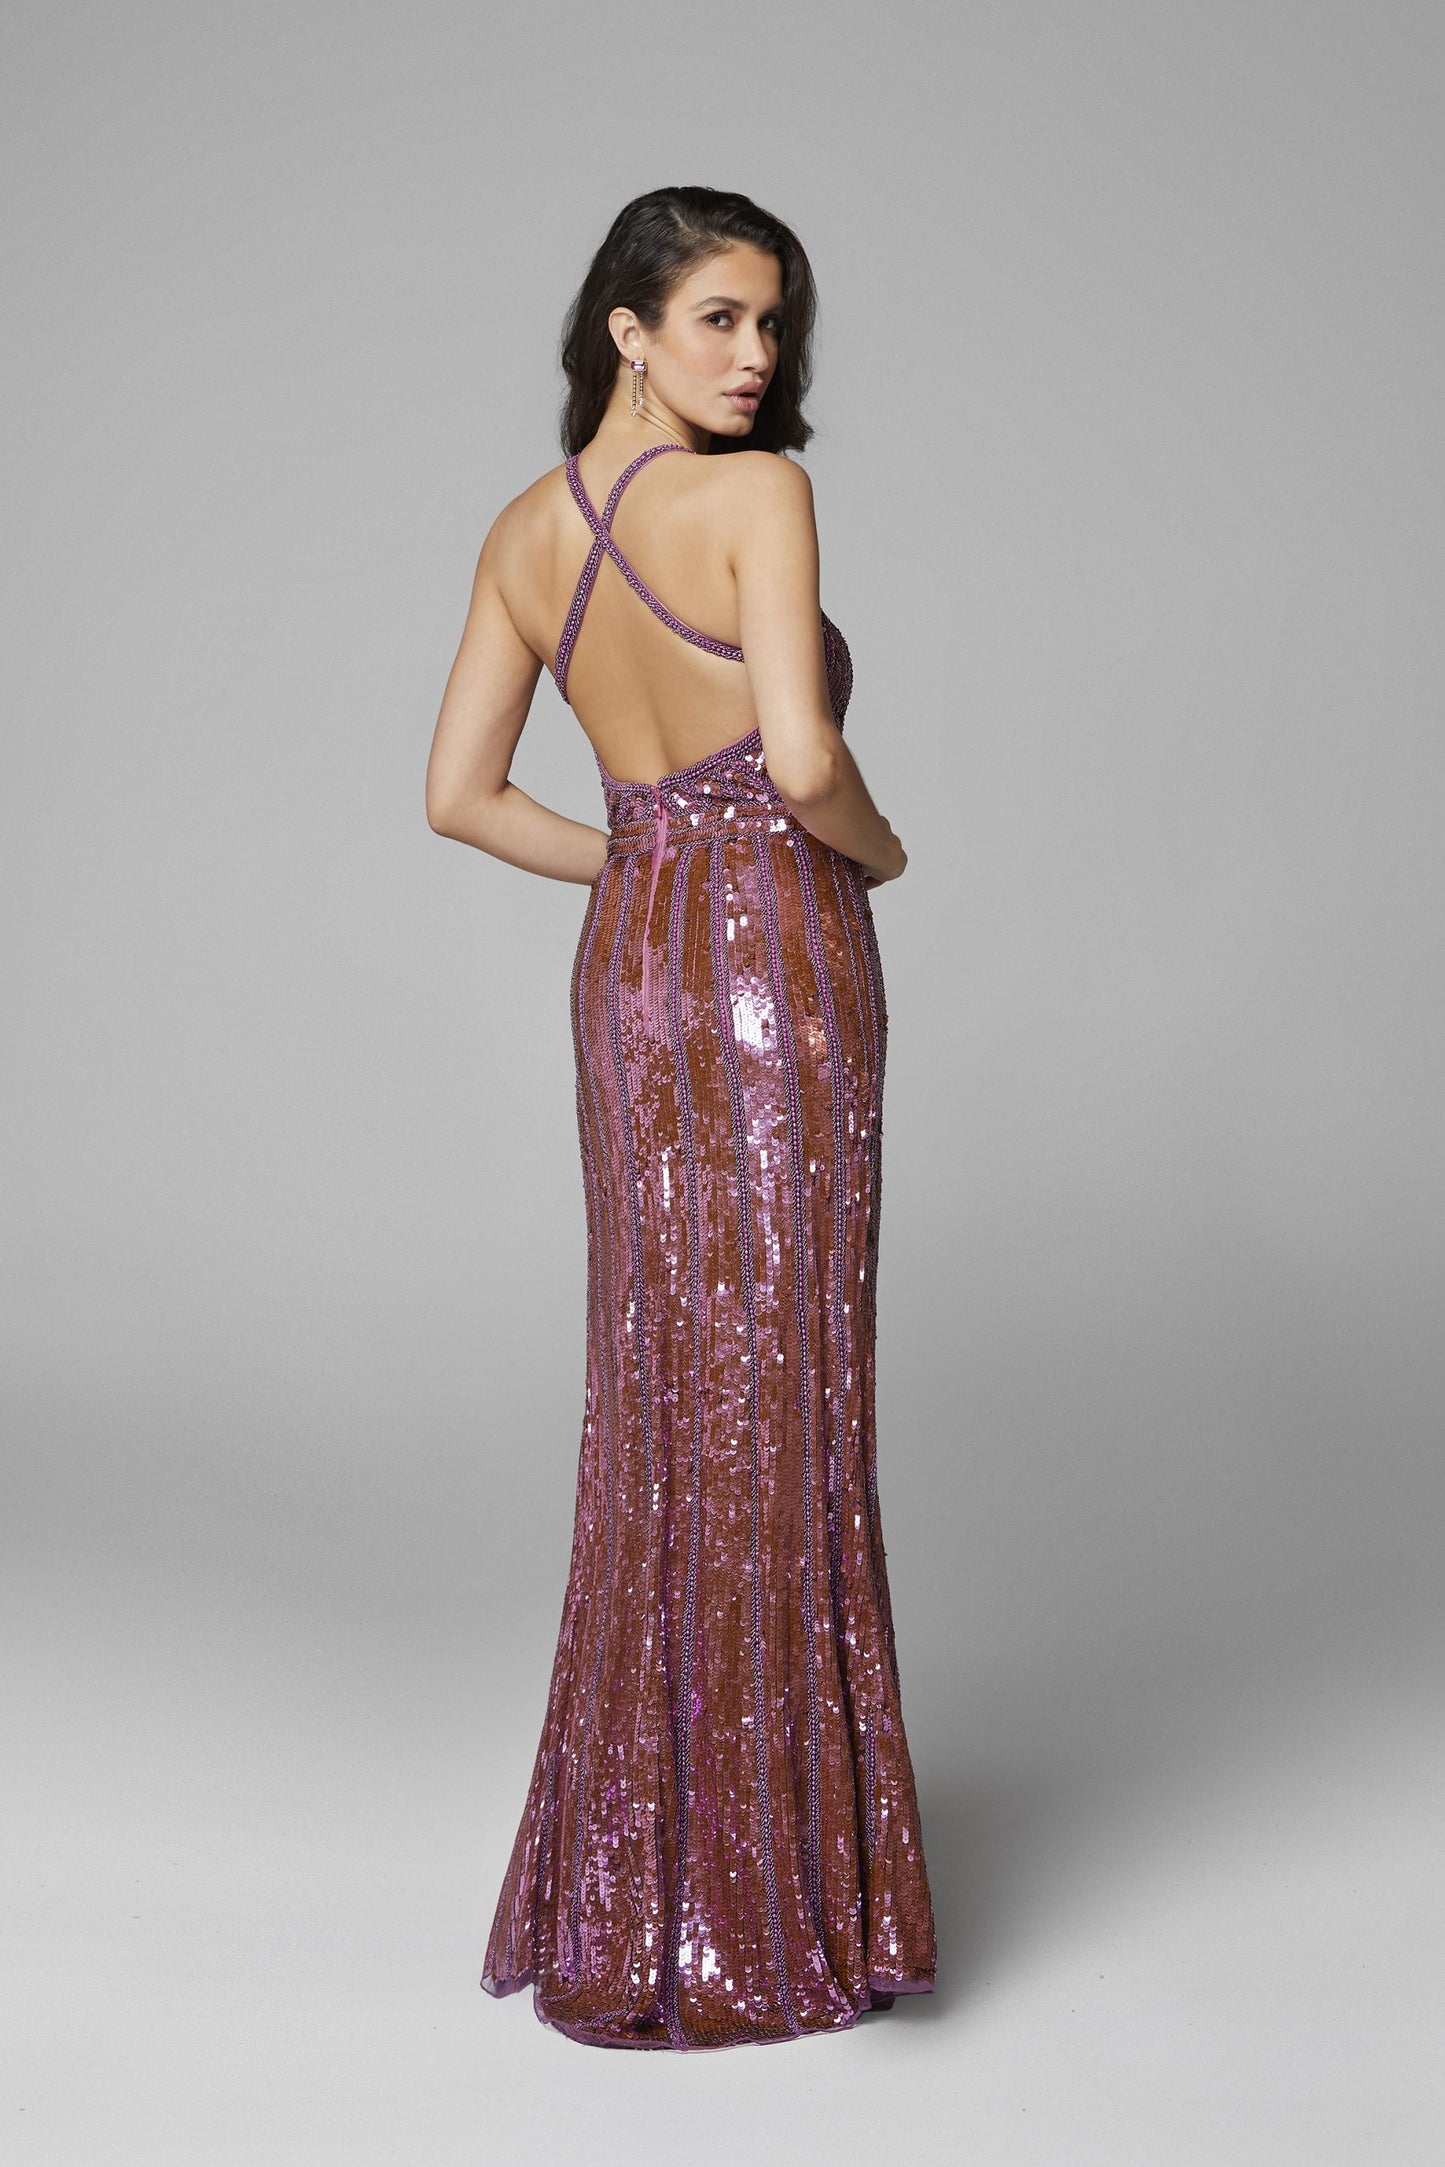 Primavera Couture 3441 is a iridescent sequins long formal Prom Dress, Pageant Gown, Wedding Dress & Formal Evening Wear gown. Featuring a v neckline with Iridescent Multi sequins and Hand Embellishments. This evening gown is perfect for any formal event! Slit in skirt. Available colors:  Ivory, Royal Blue, Teal, Peacock, Pink, Raspberry Available sizes:  00,0,2,4,6,8,10,12,14,16,18